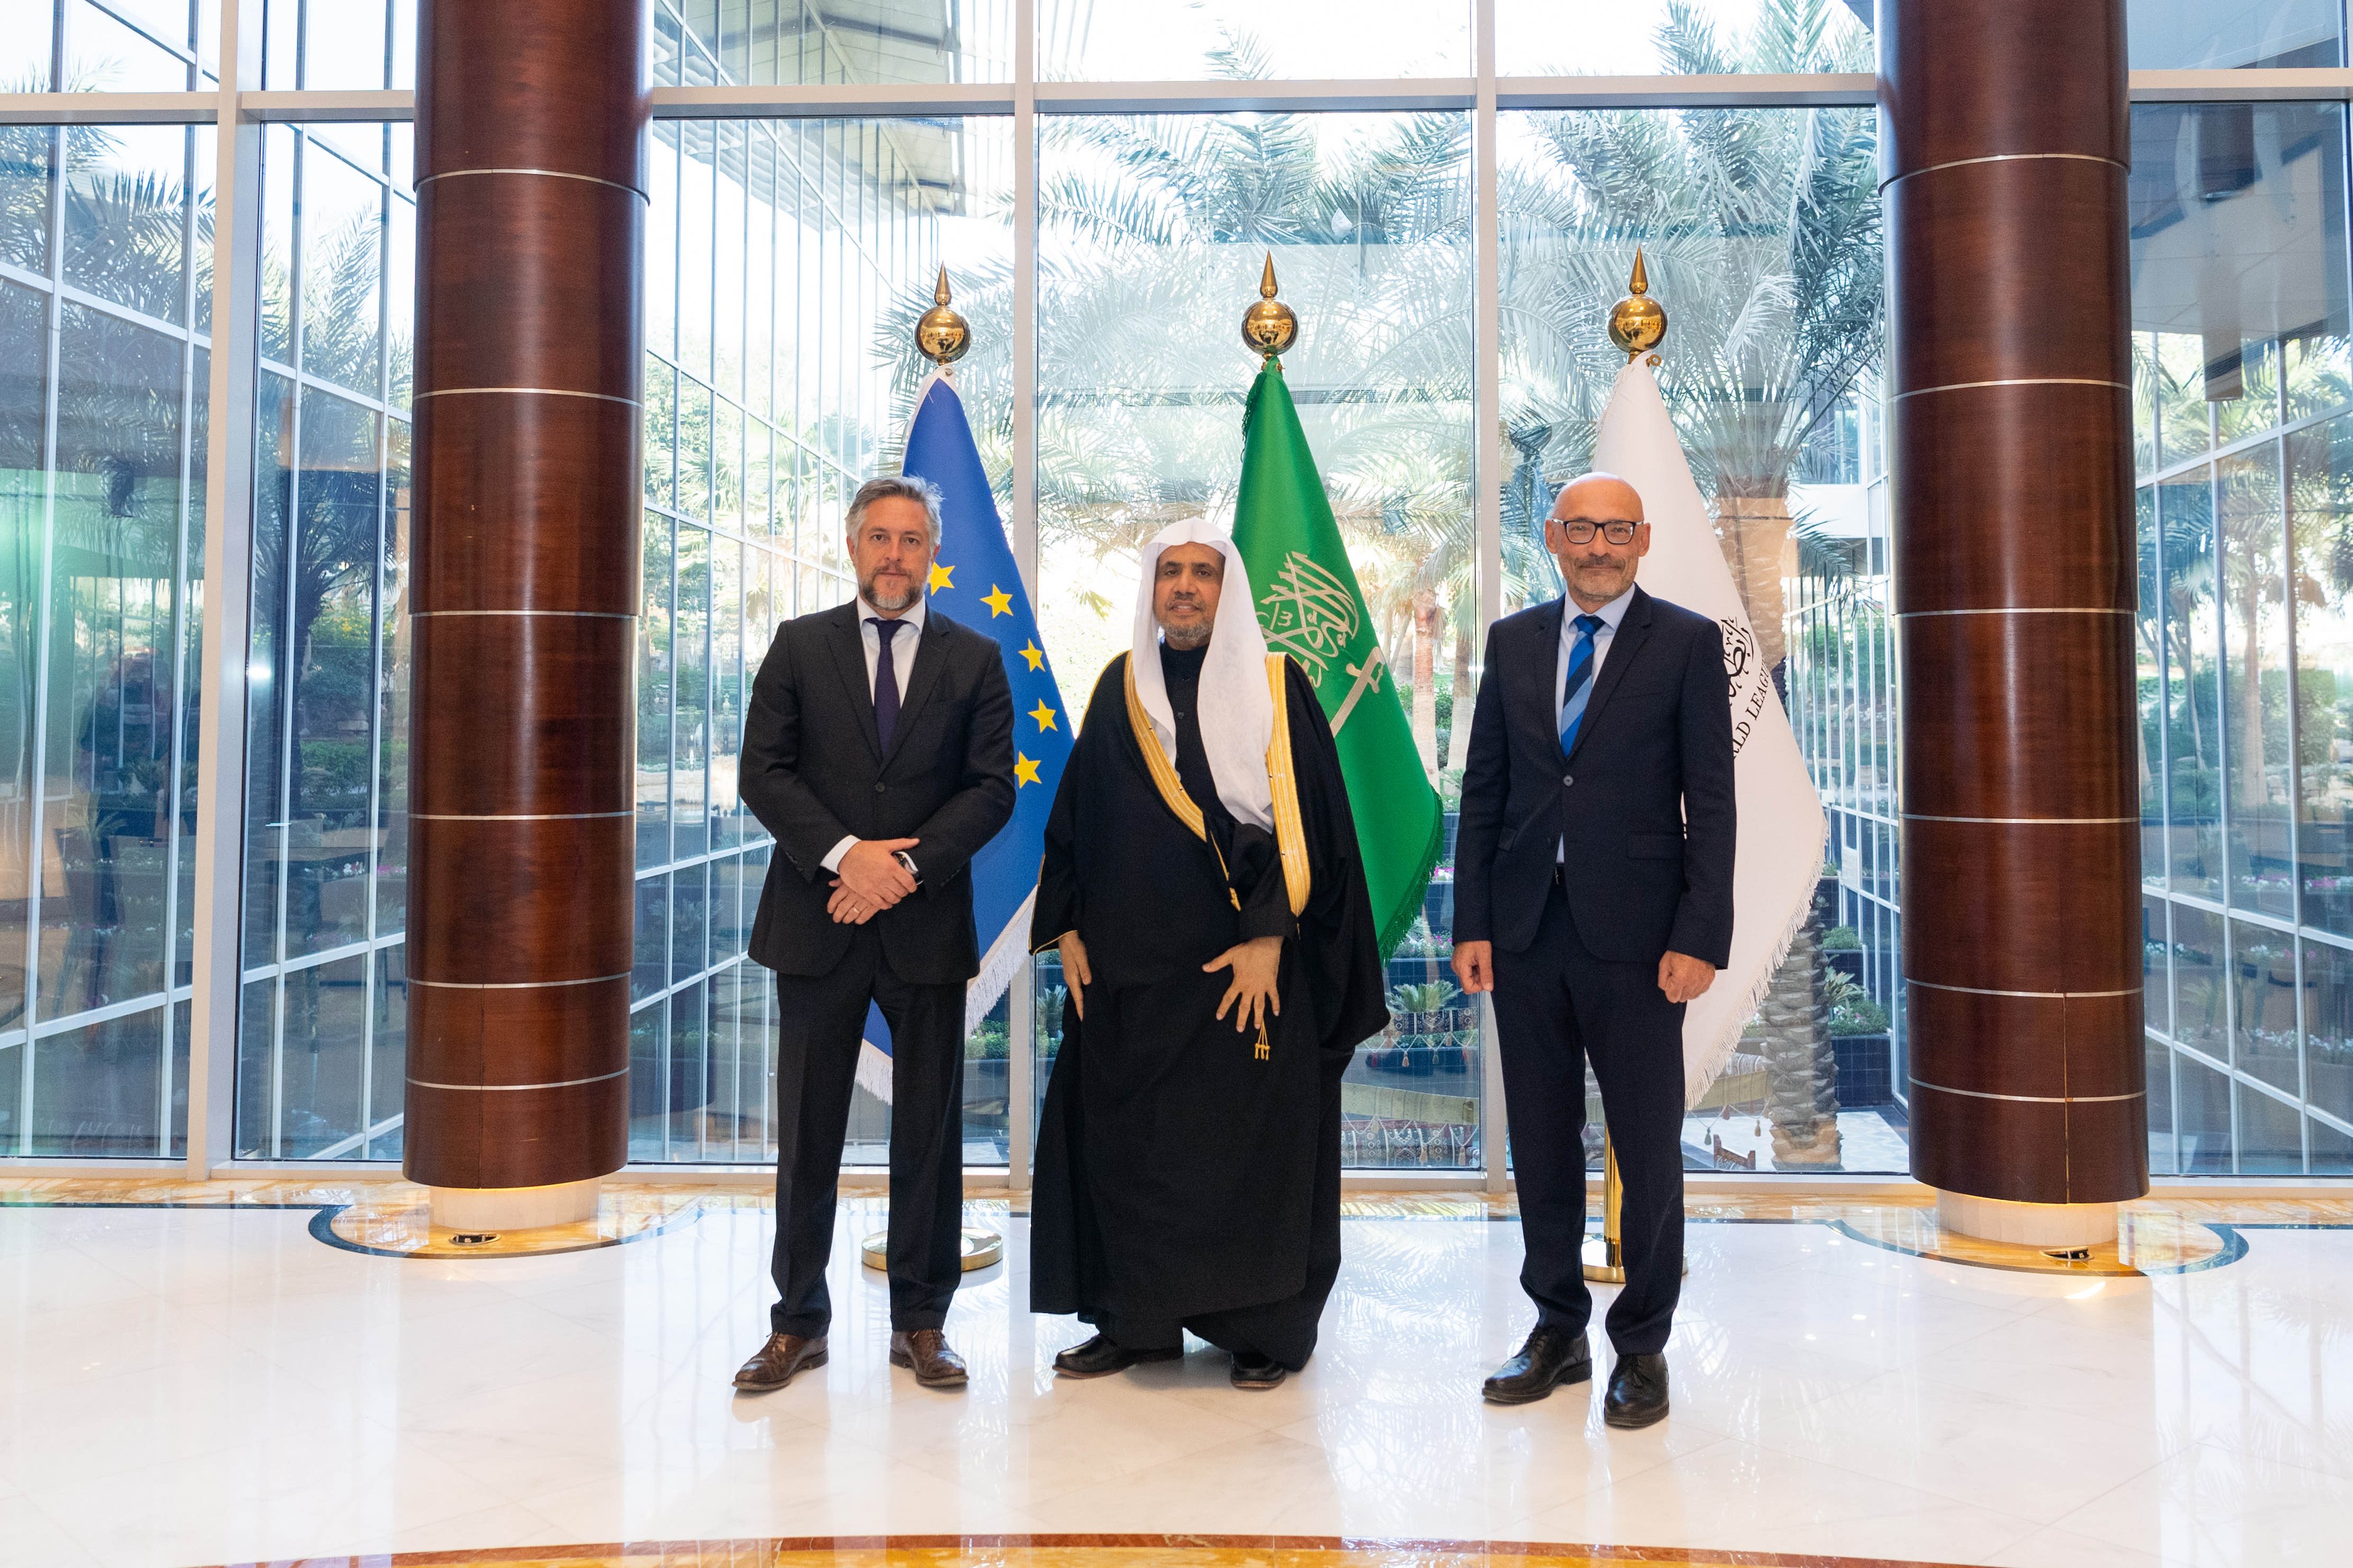 H.E. Dr. Mohammad Alissa hosted the Ambassador of the European Union to the Kingdom of Saudi Arabia, Mr. Patrick Simonet, in the presence of his deputy